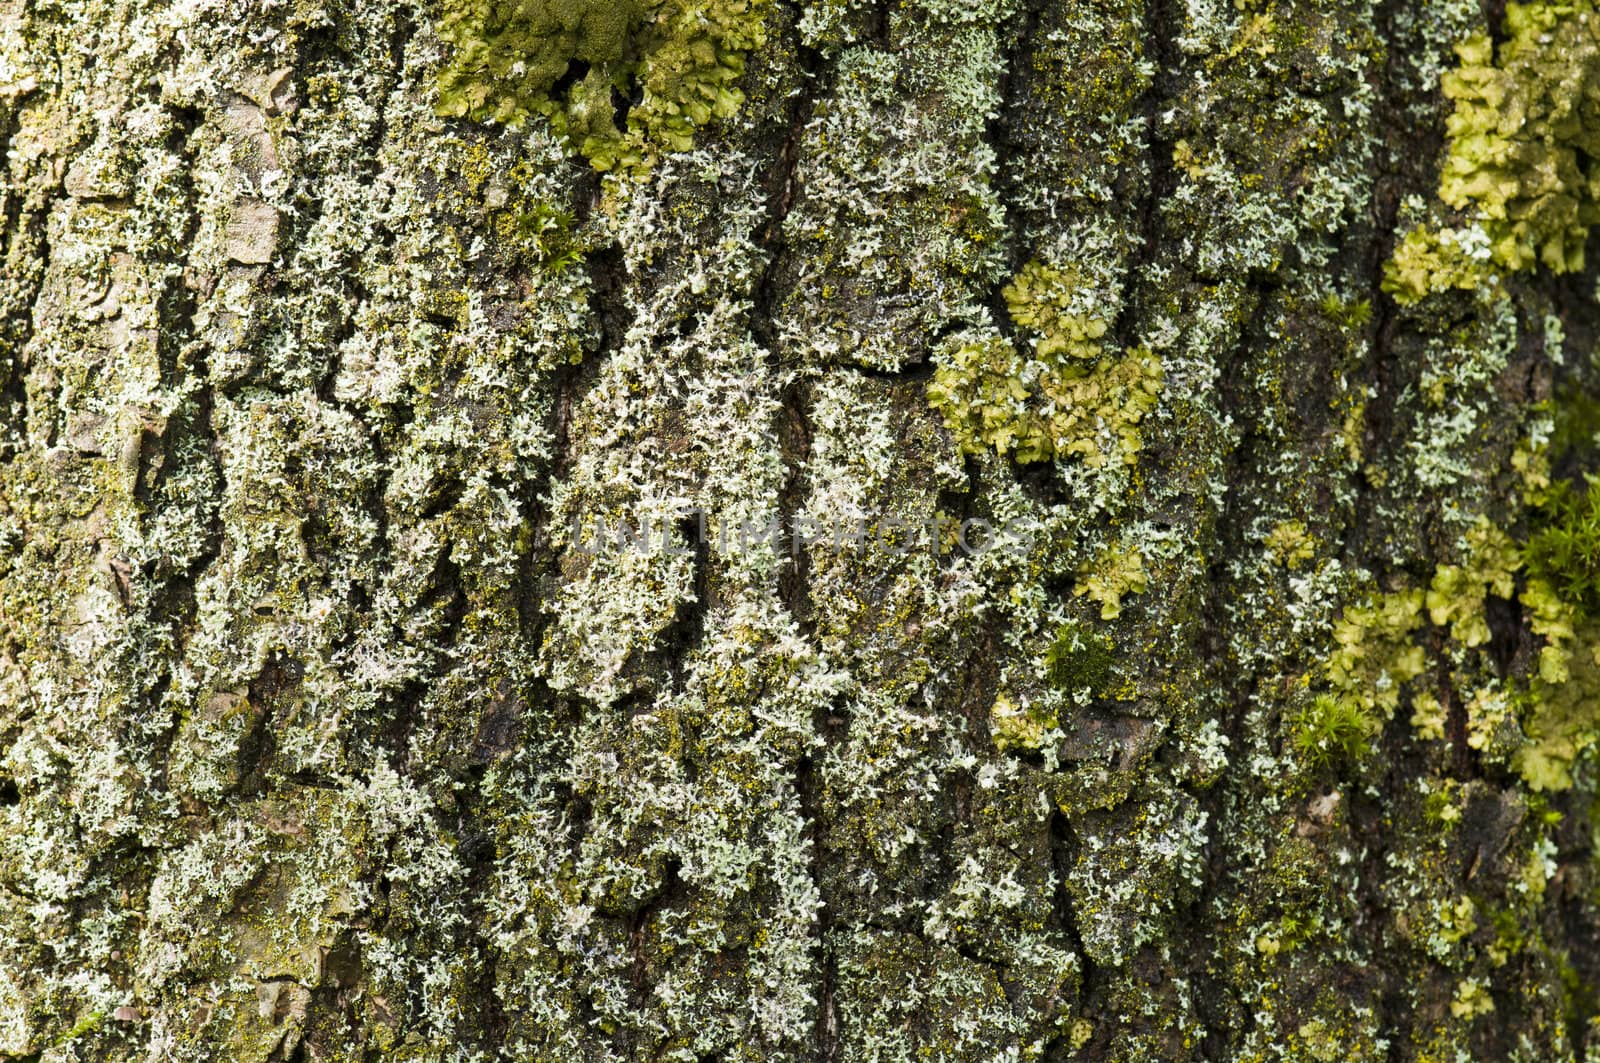 Partial view of a tree trunk bark with moos